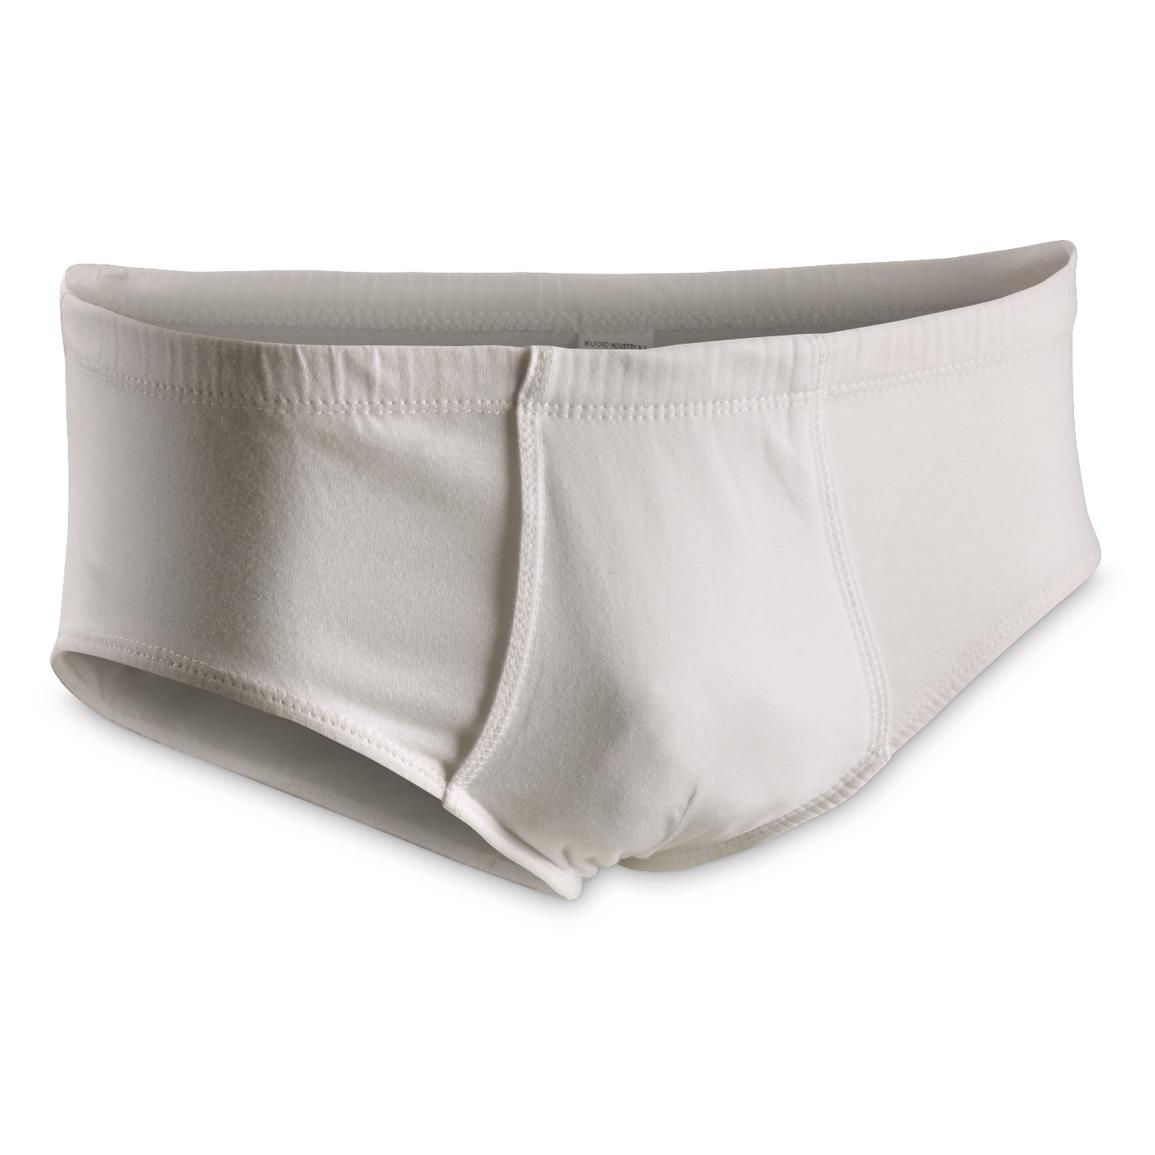 Buy Military Cotton Briefs of the Dutch Army, Military Surplus